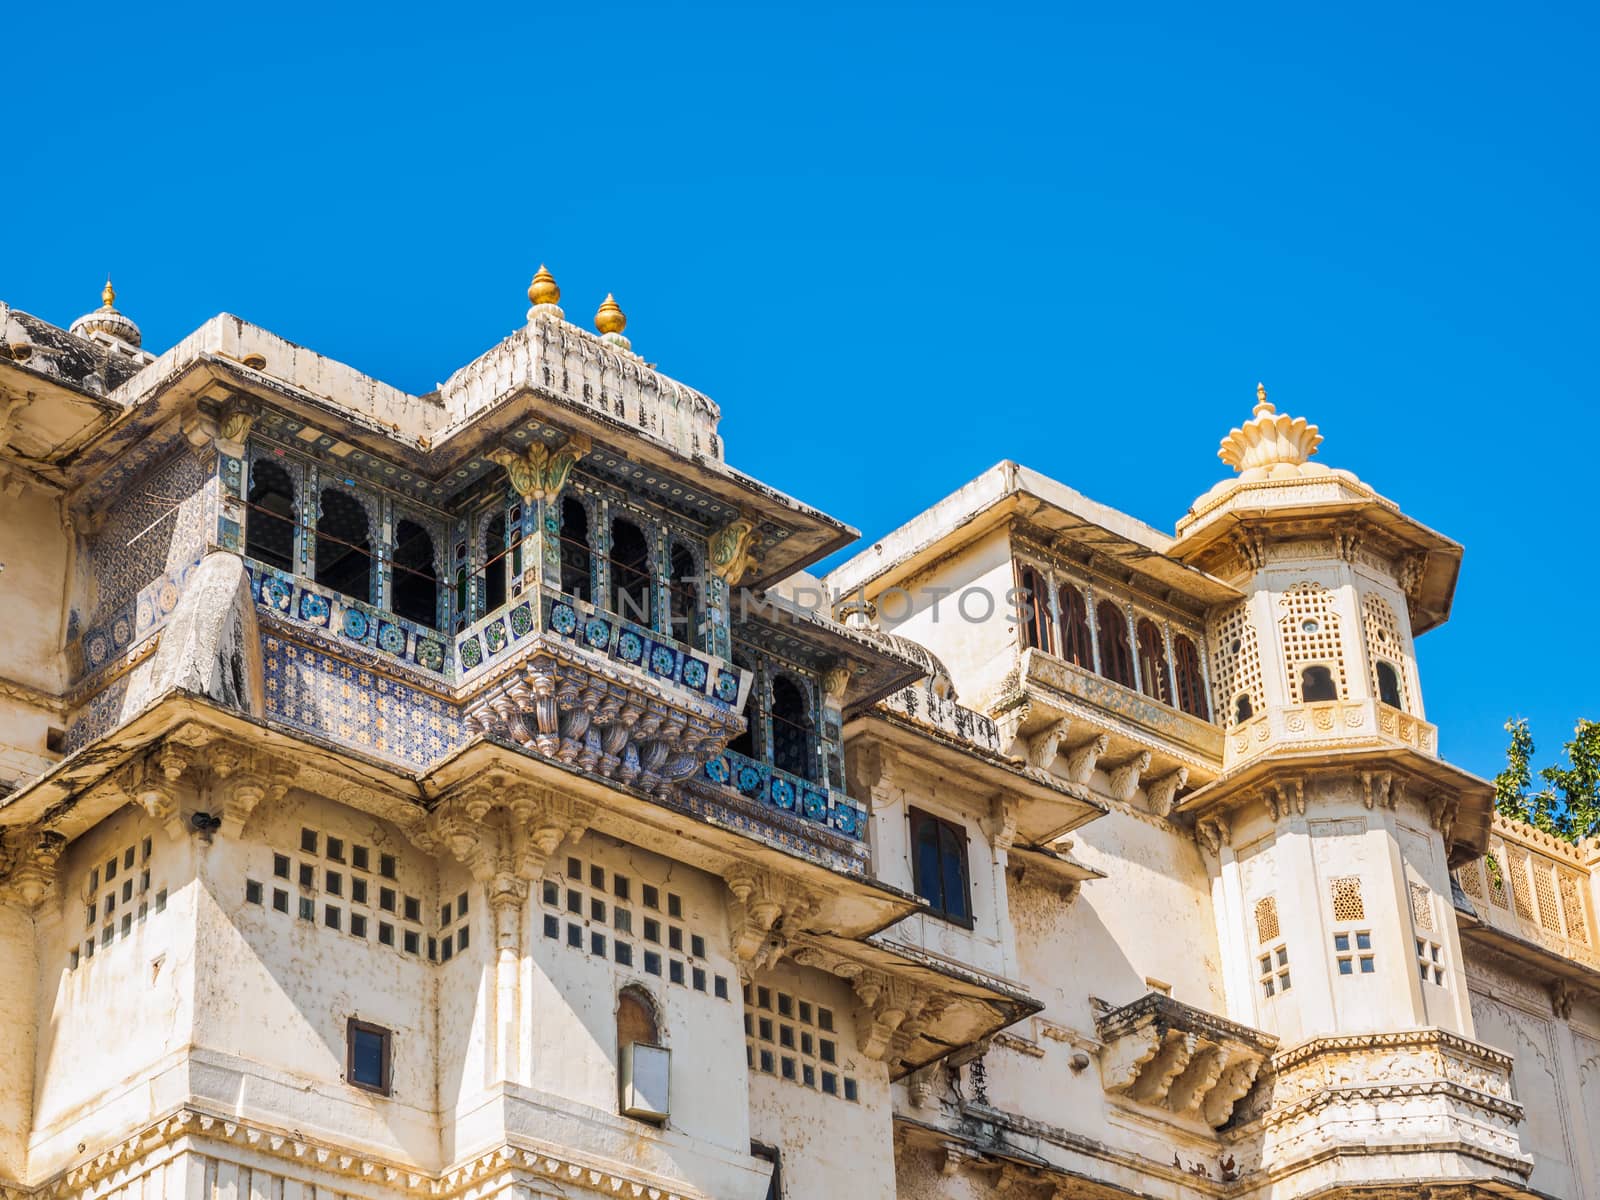 Balcony of Udaipur City Palace in Rajasthan, India